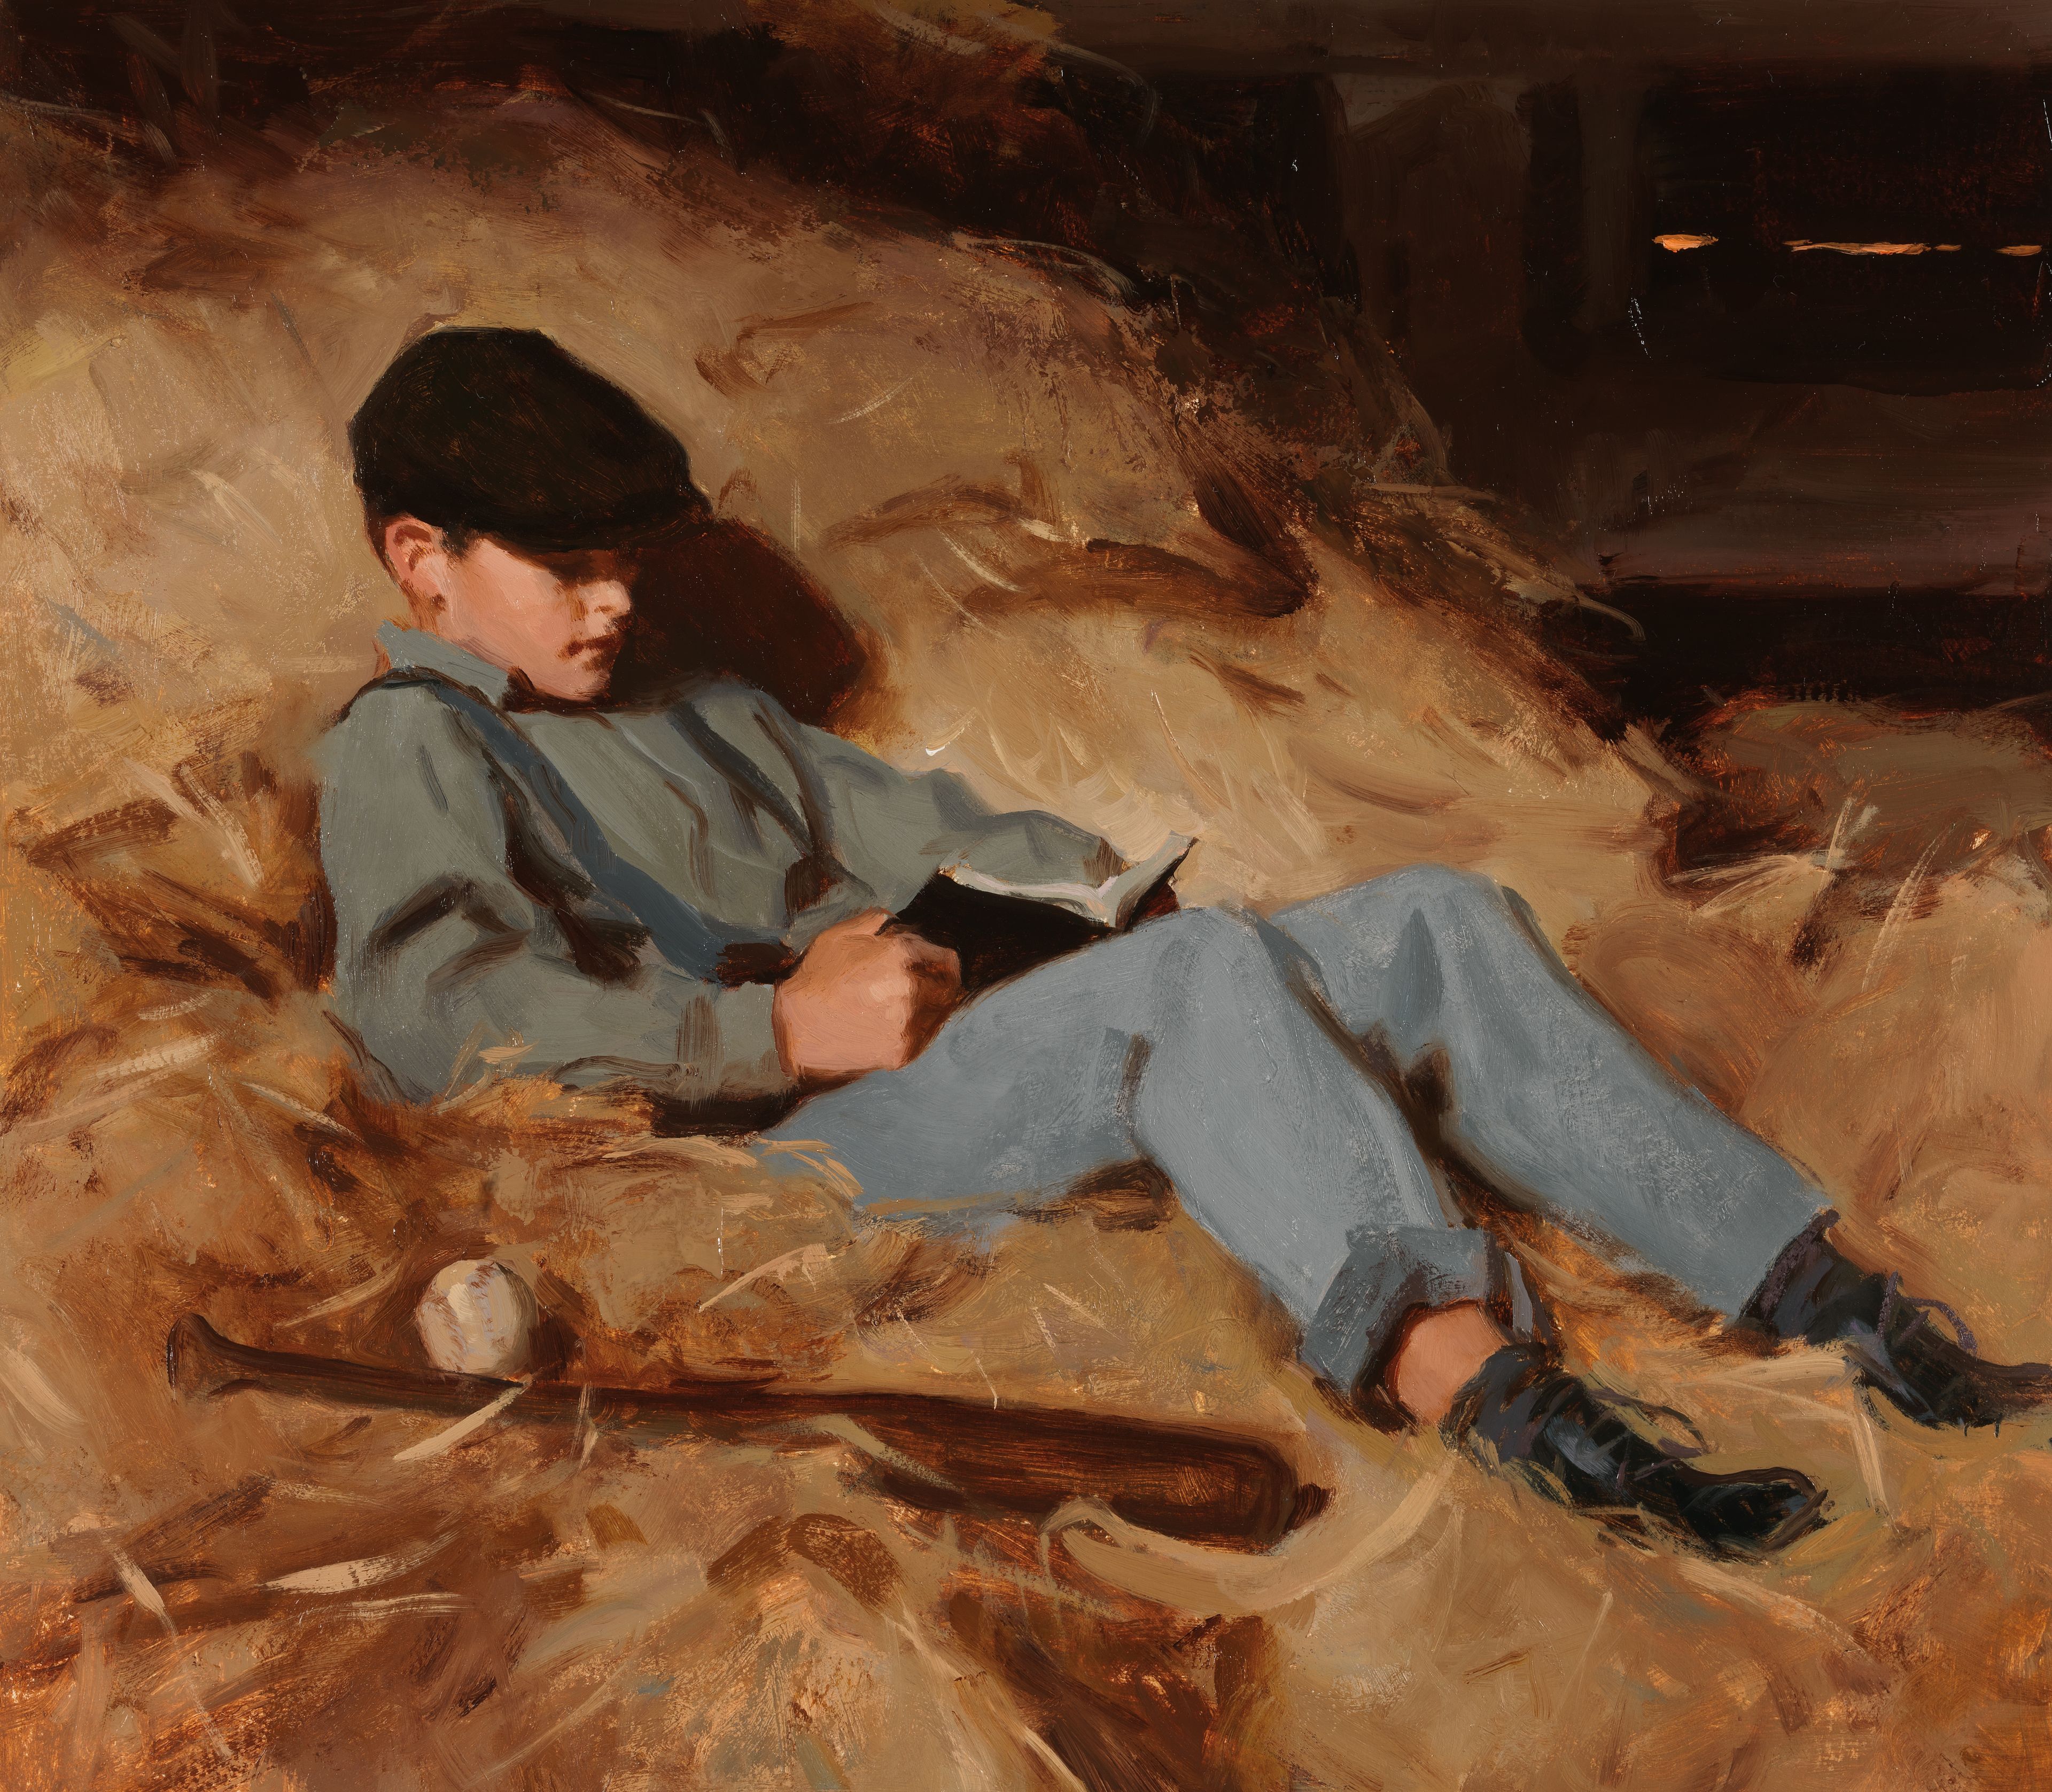 Joseph Fielding Smith as a young boy sitting in a hayloft, reading scriptures. Teachings of Presidents of the Church: Joseph Fielding Smith (2013), 5